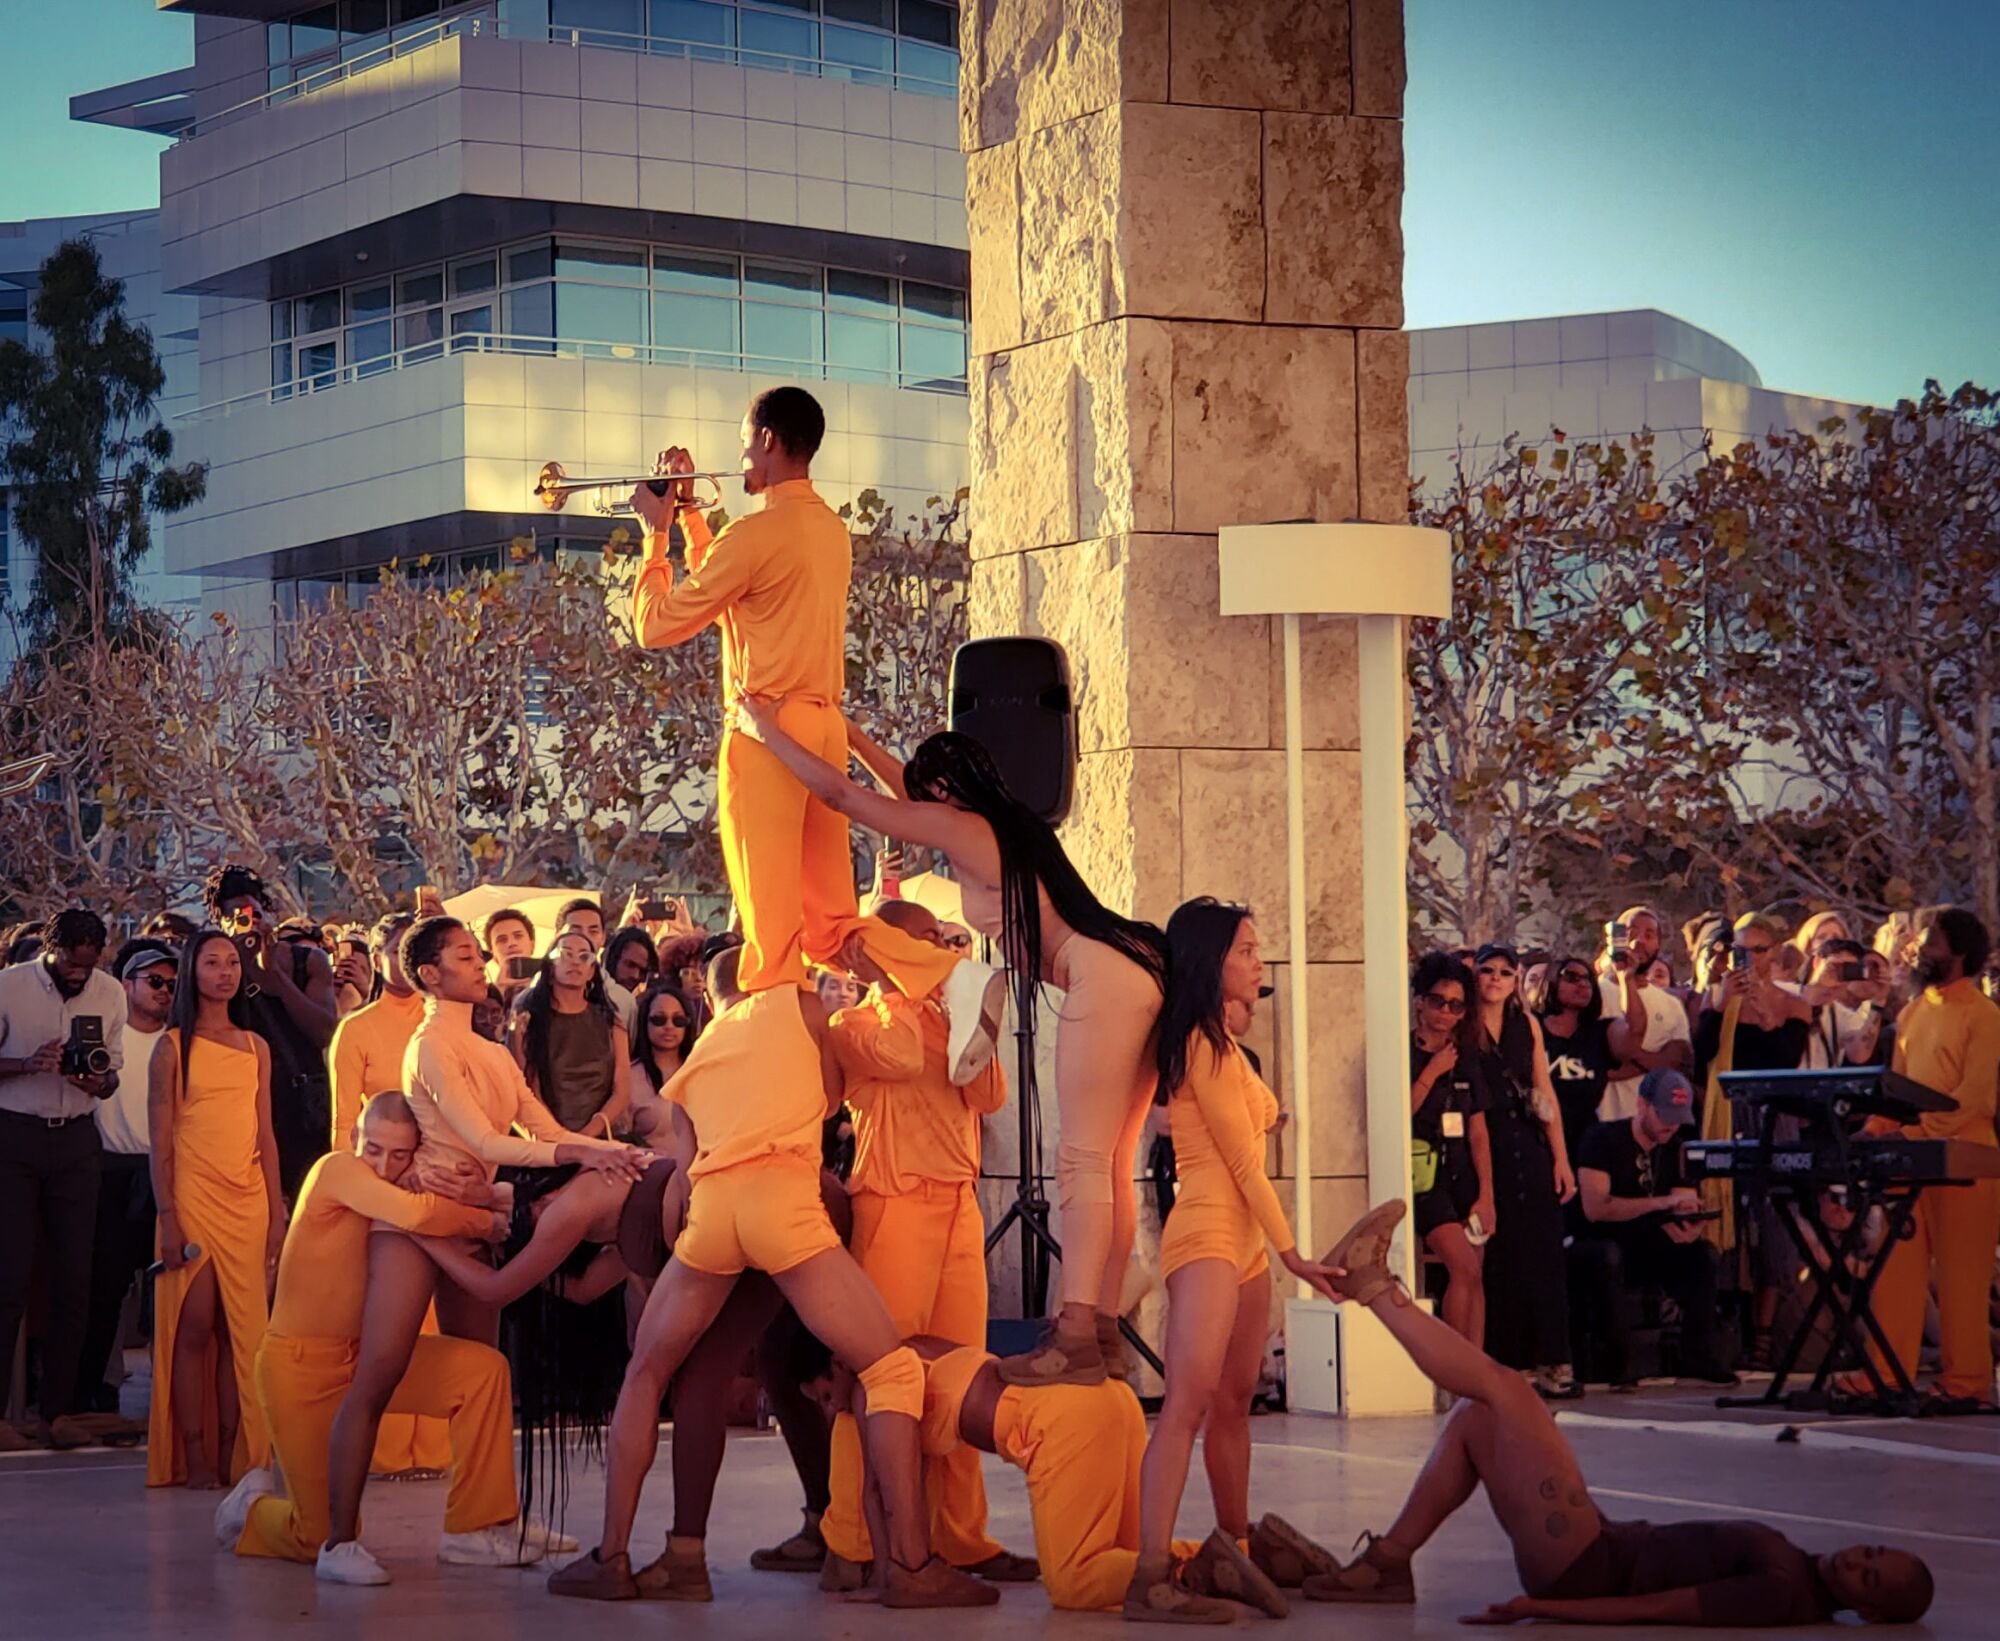 R&B singer Solange, wearing sunglasses toward the left, watches a dance performance at the Getty Center. 